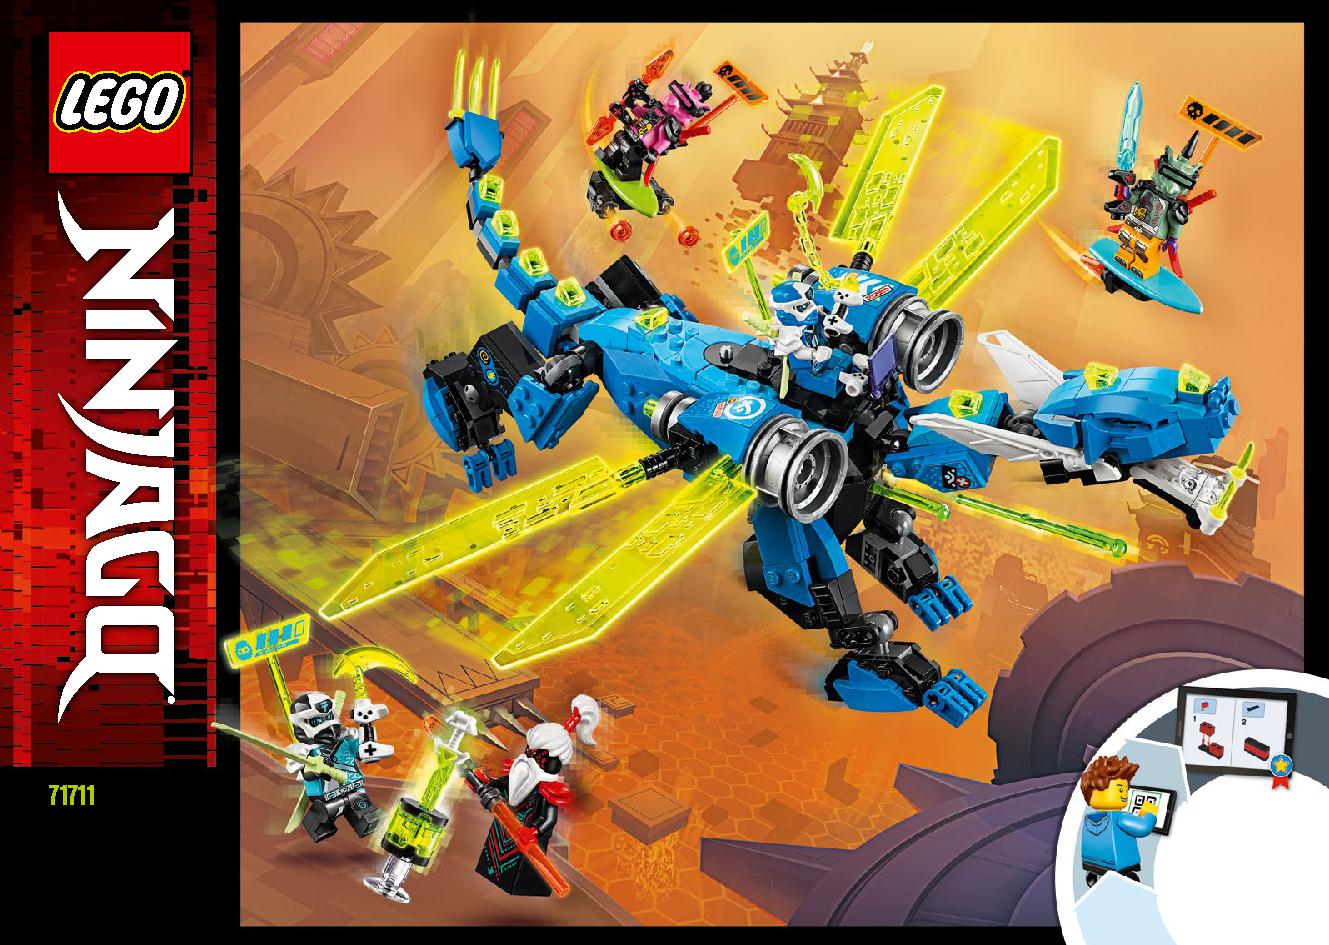 Jay's Cyber Dragon 71711 LEGO information LEGO instructions 1 page